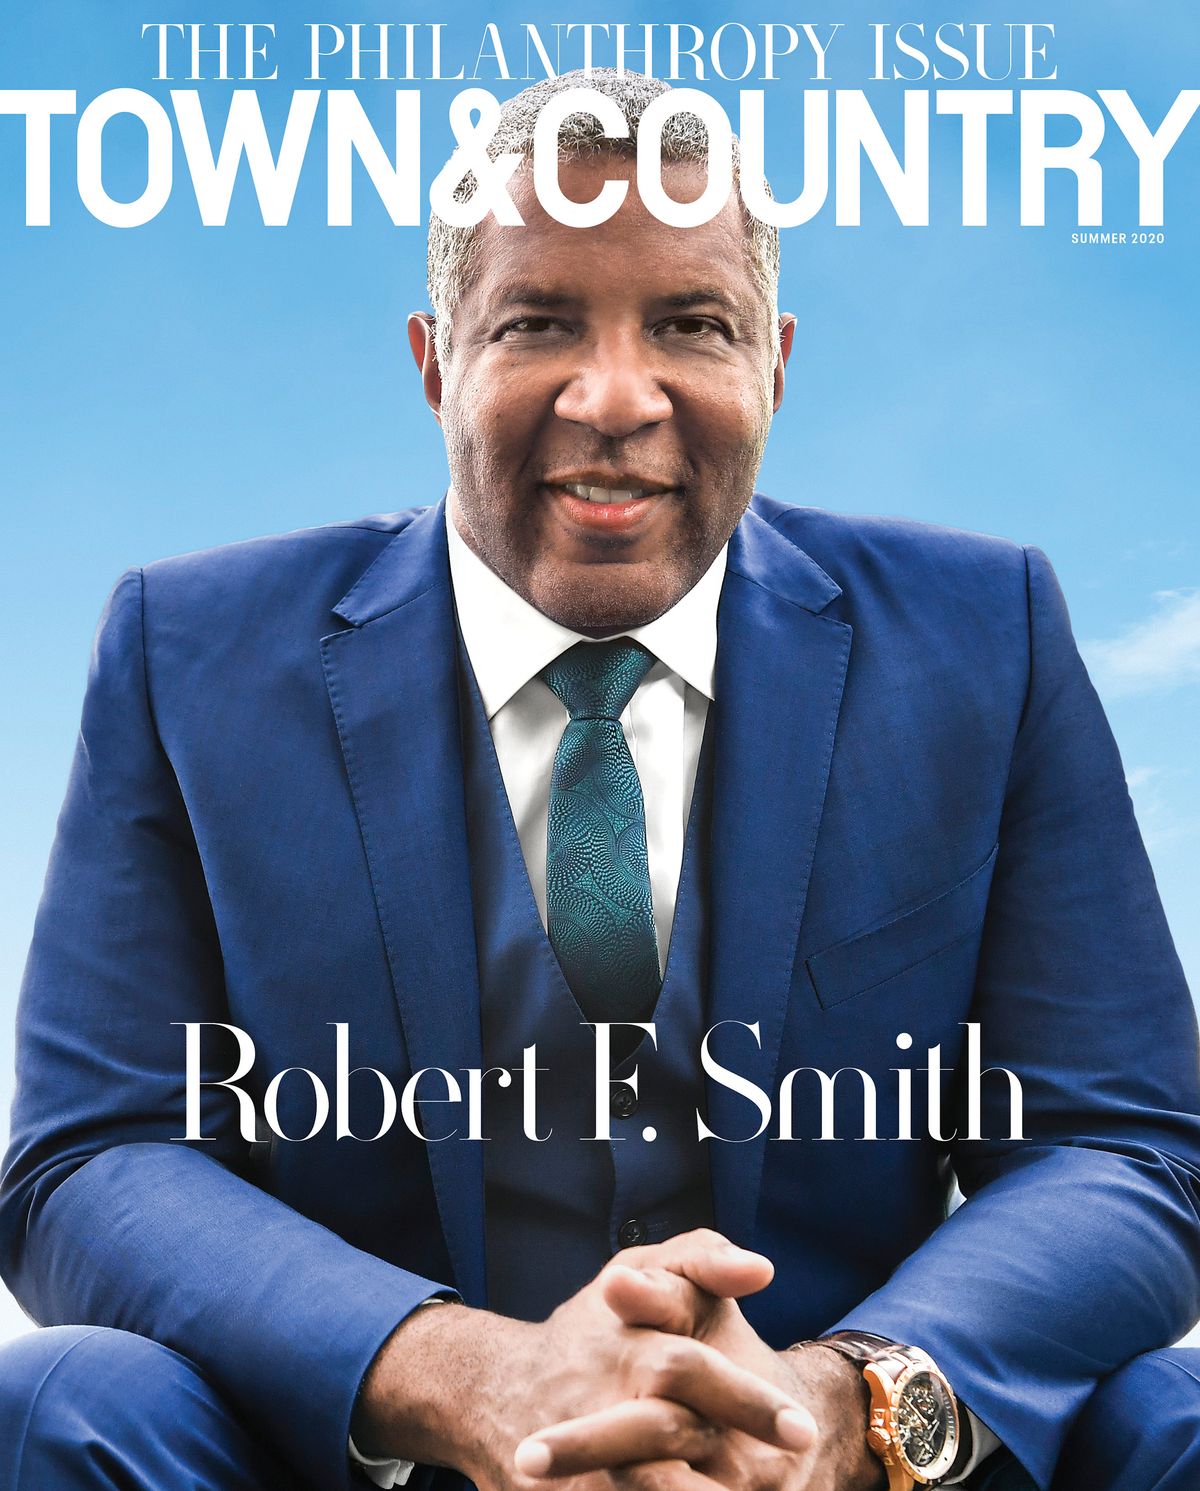 robert f smith on the cover of town  country magazine